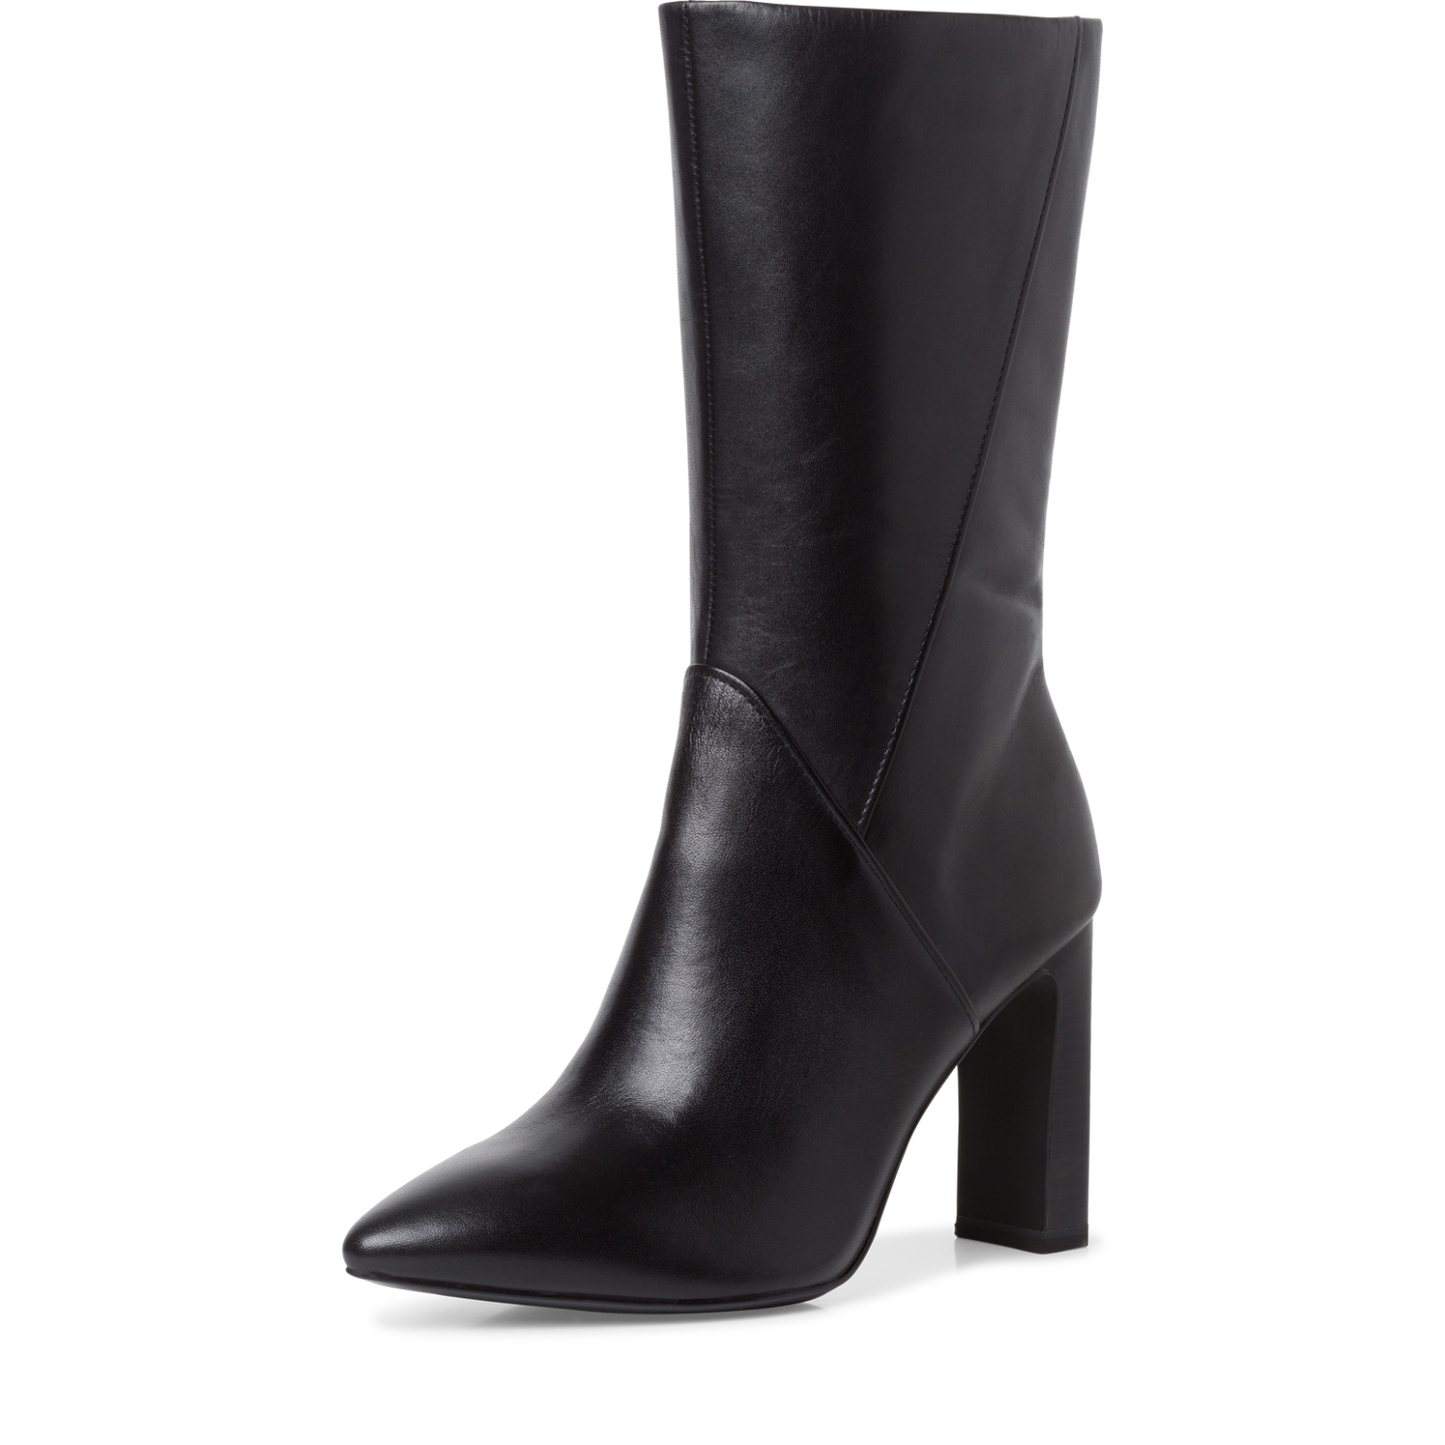 Leather Heeled Calf Length Boots - Black